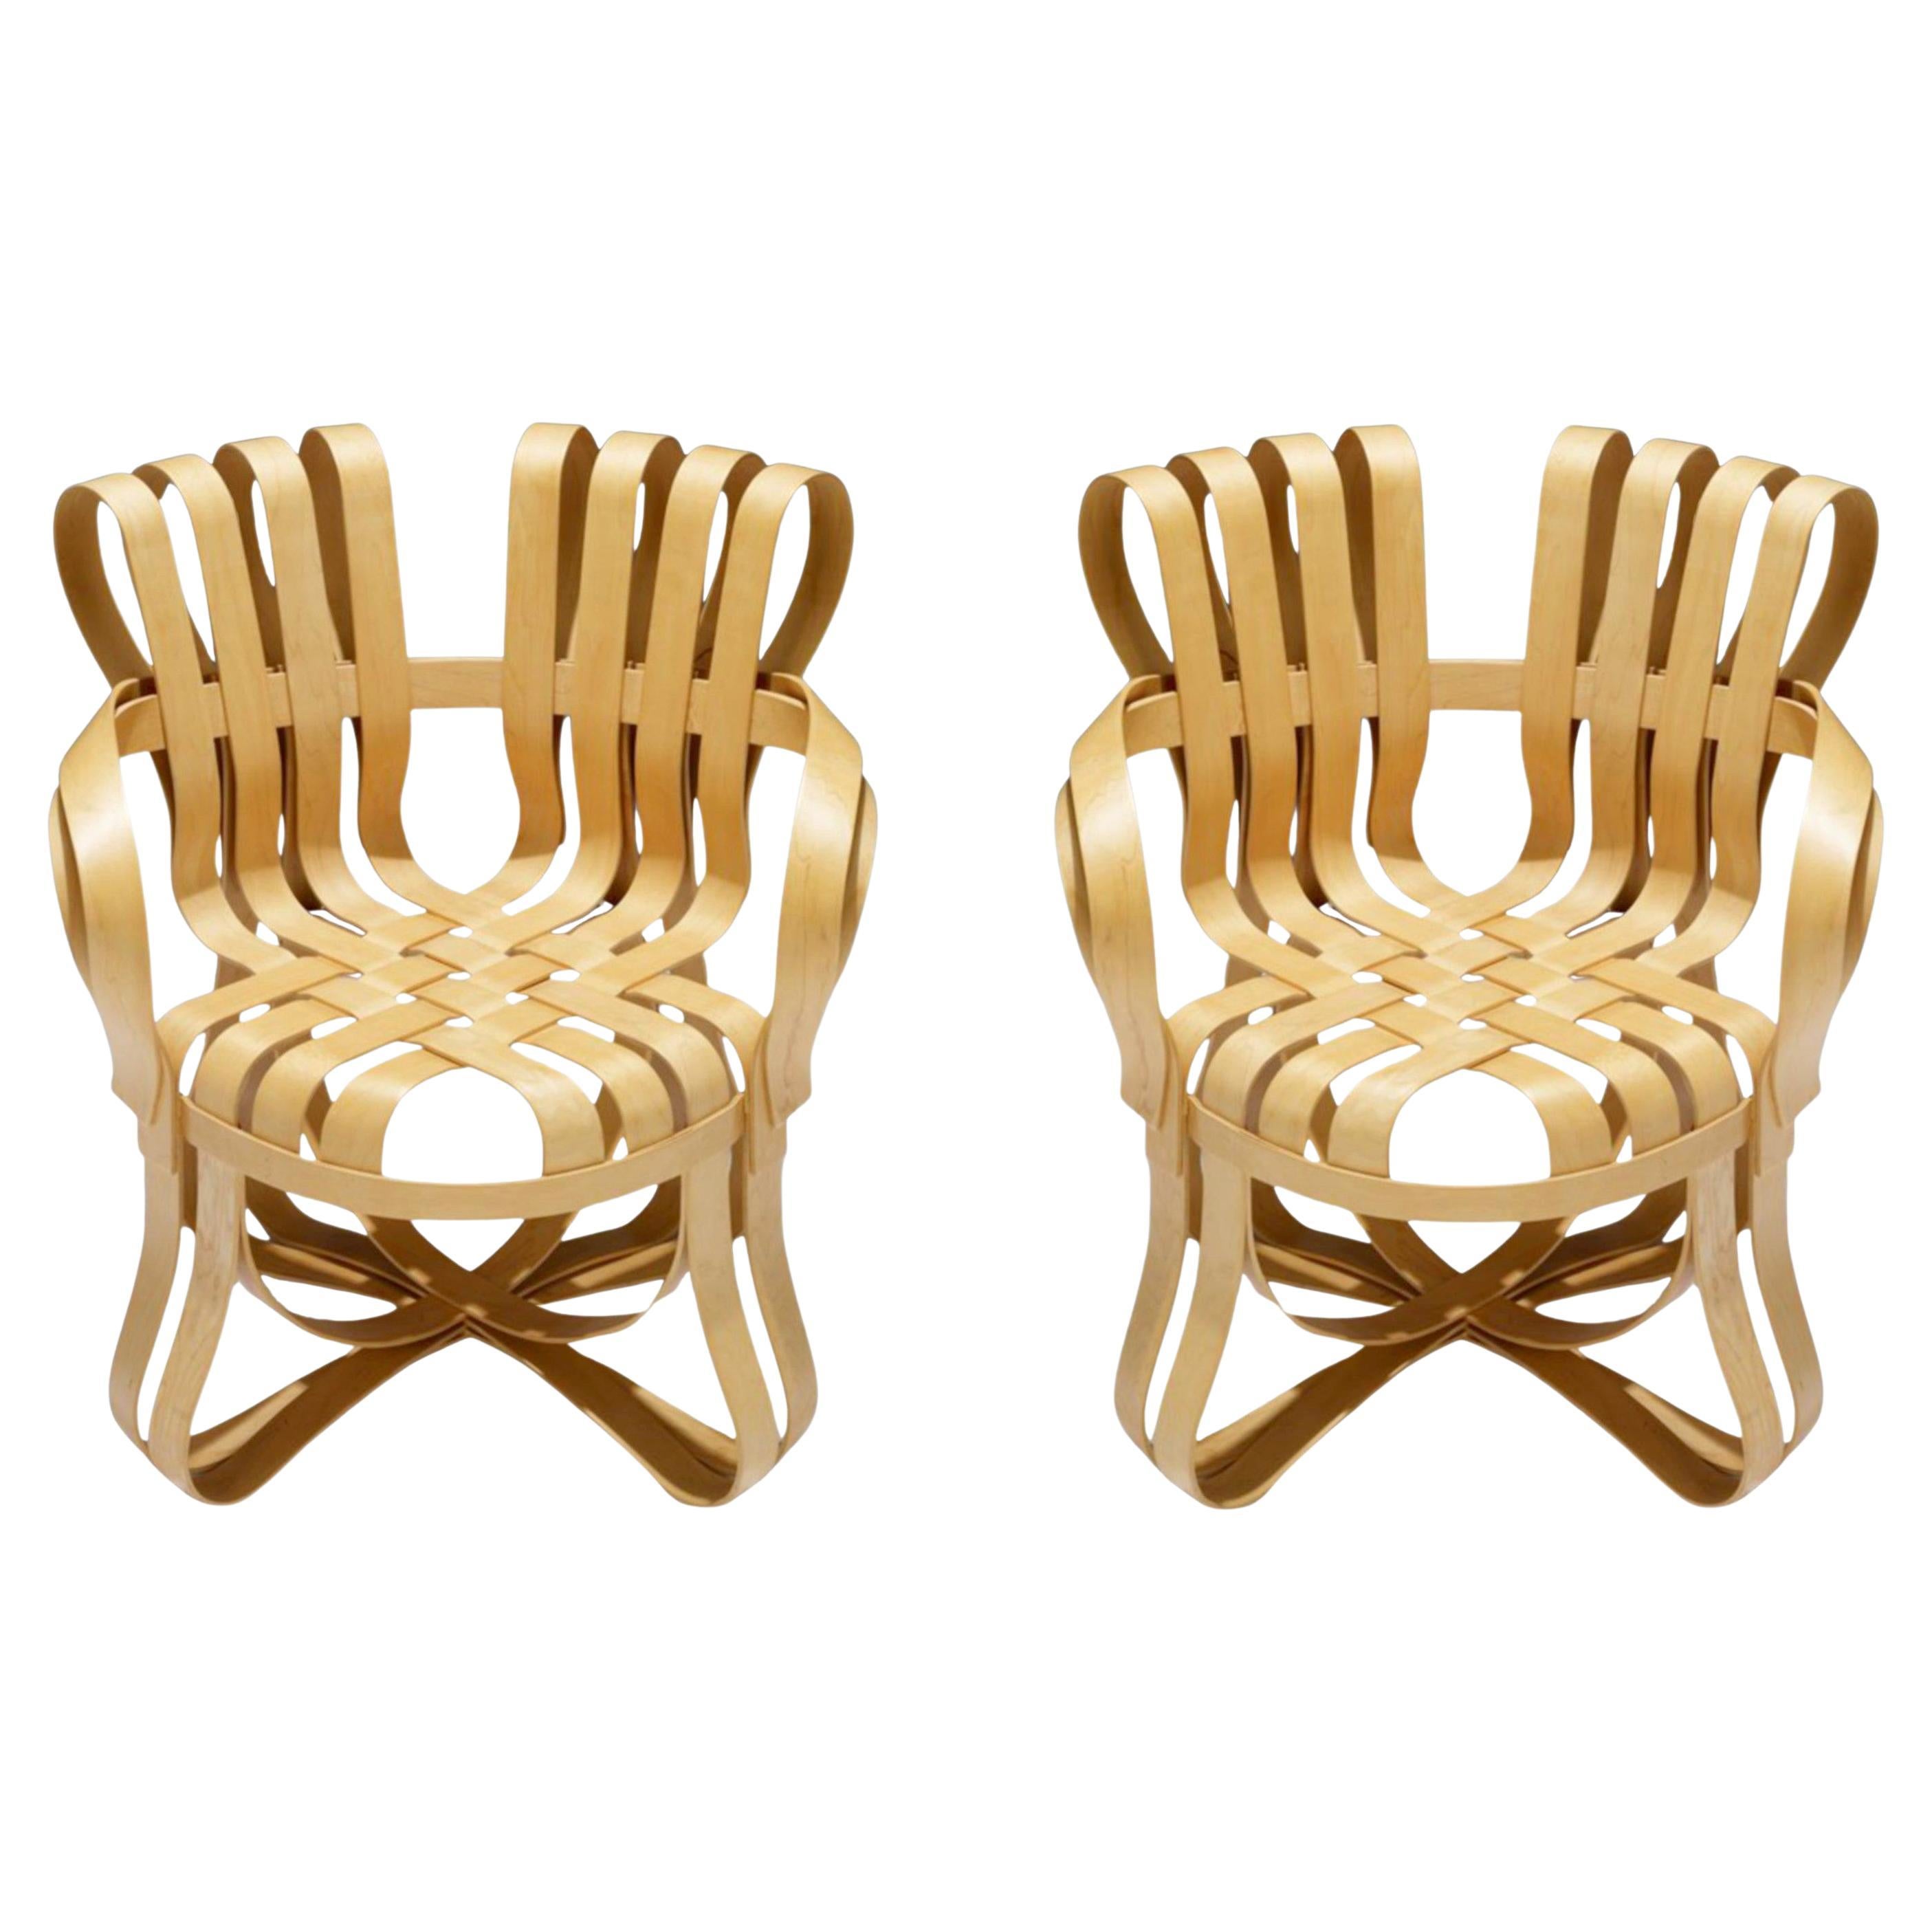 Frank Gehry for Knoll, Pair of Cross Check Chairs in Bent Maple Wood